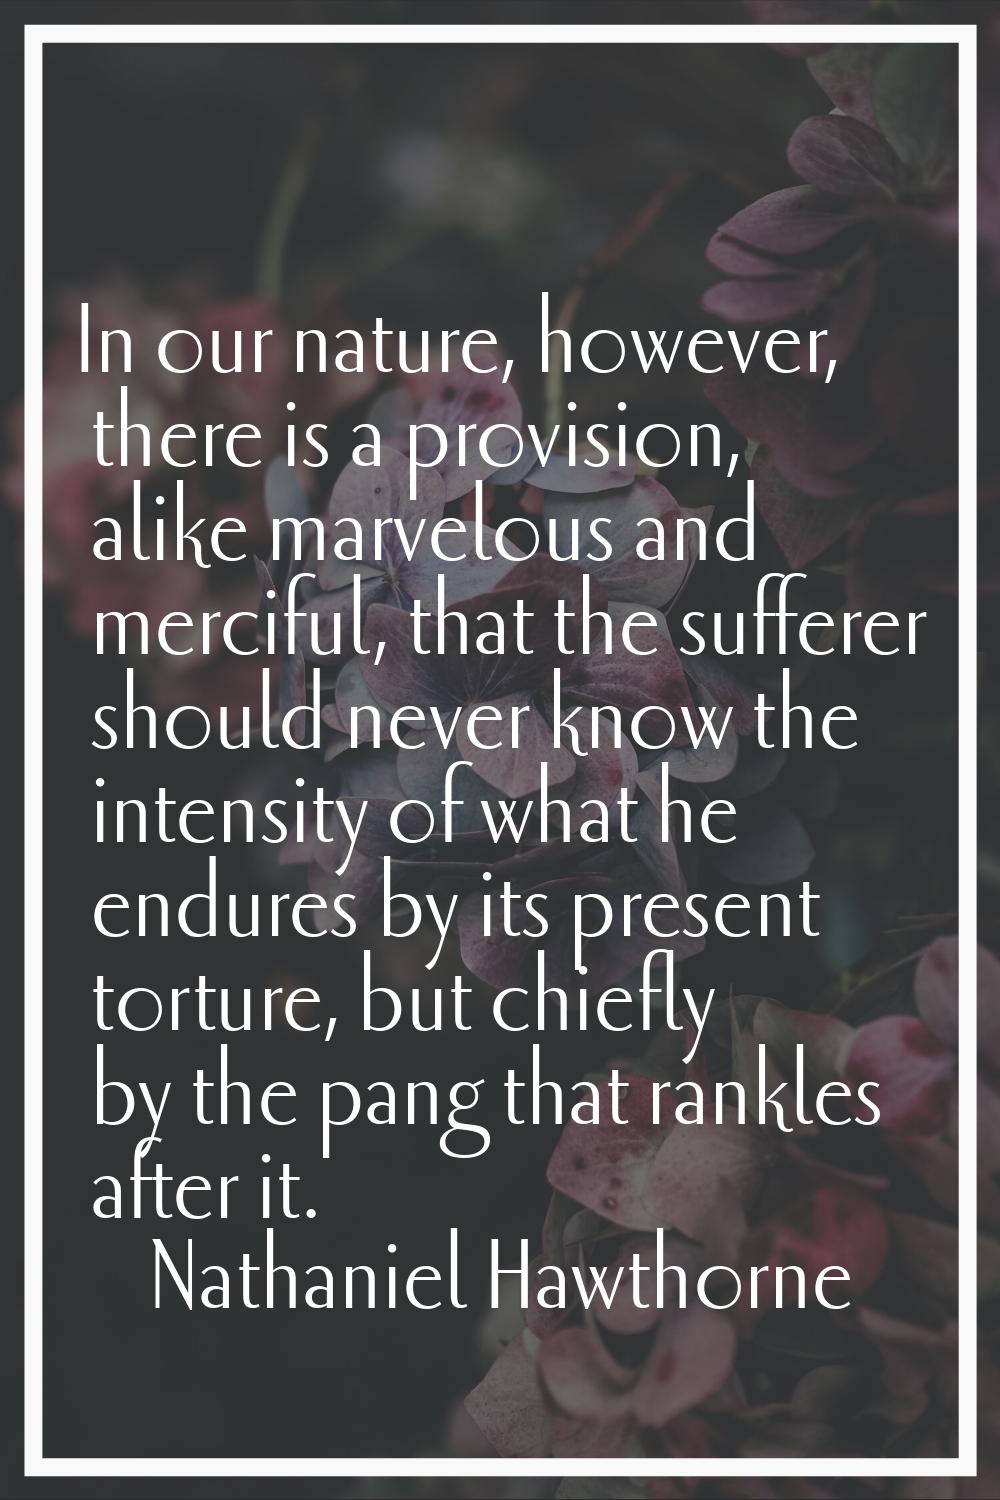 In our nature, however, there is a provision, alike marvelous and merciful, that the sufferer shoul